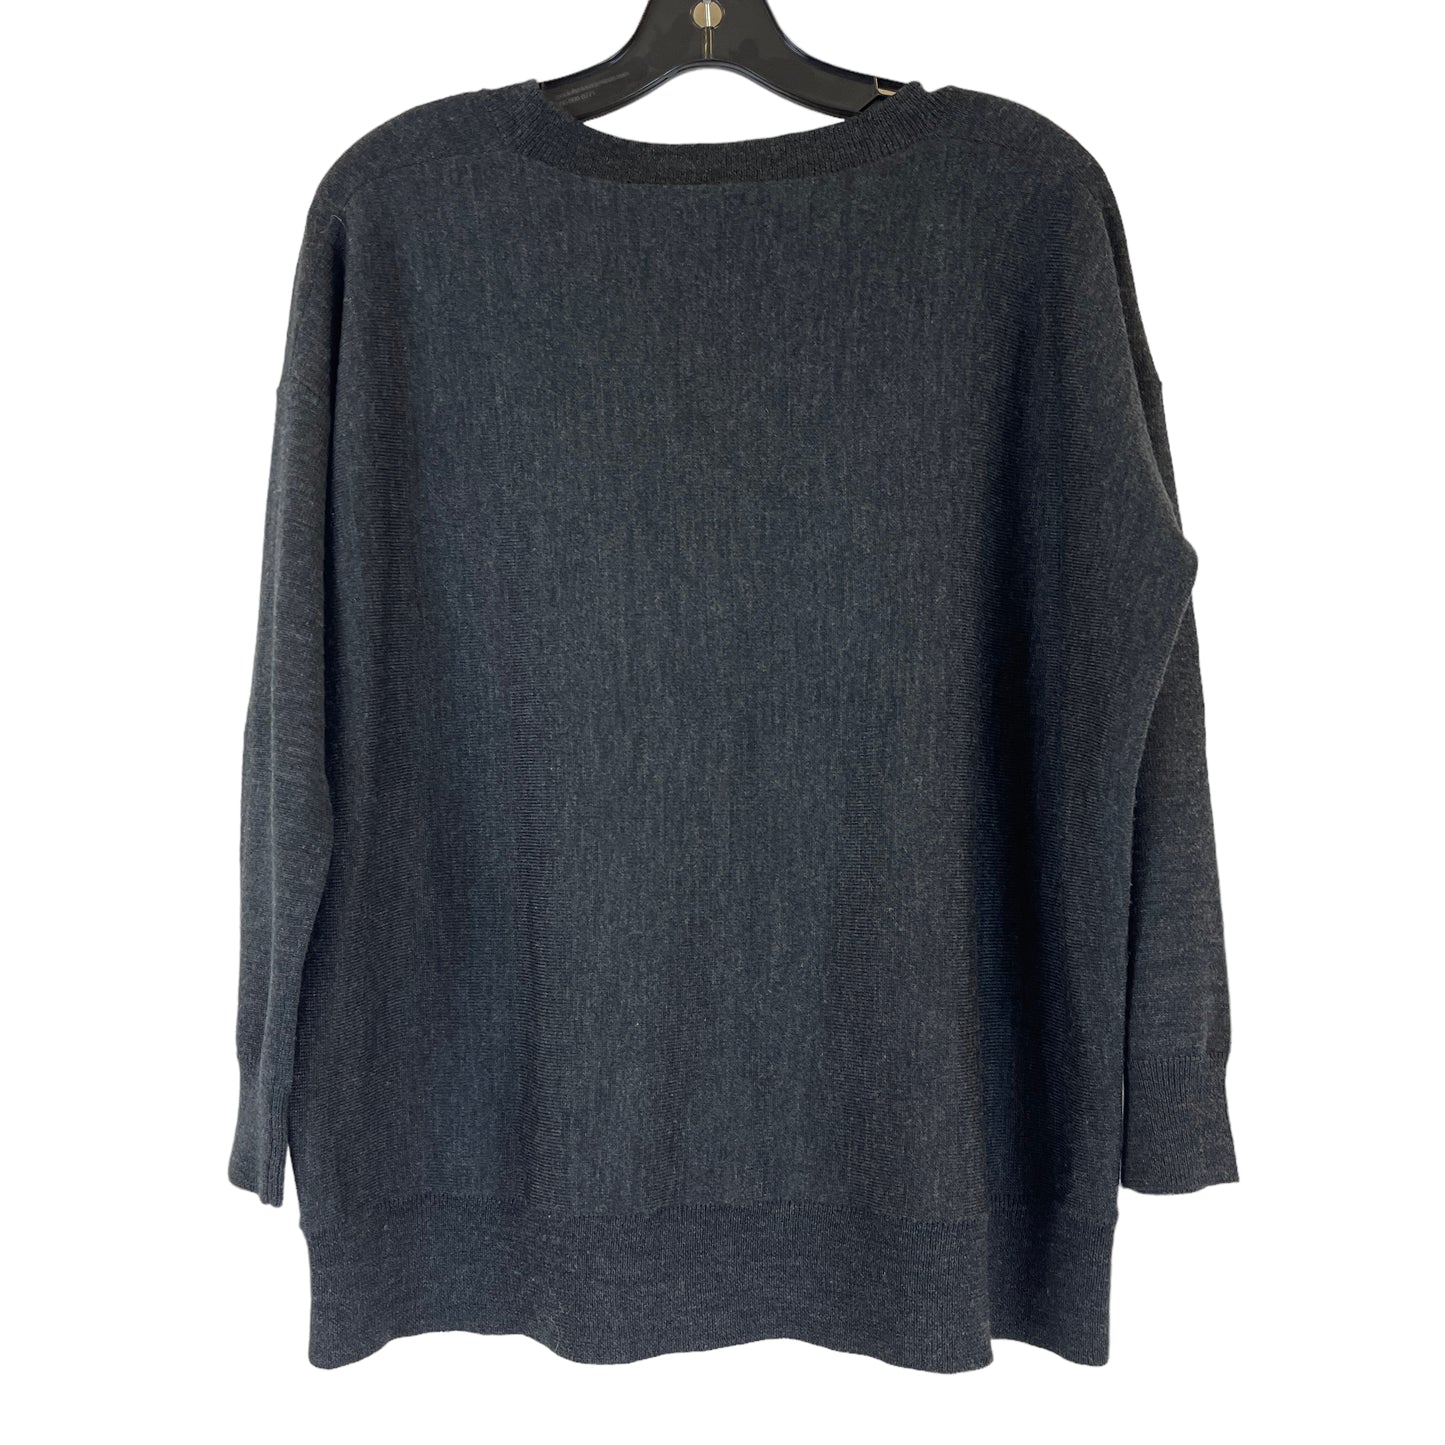 Sweater By Eileen Fisher  Size: Petite   Small